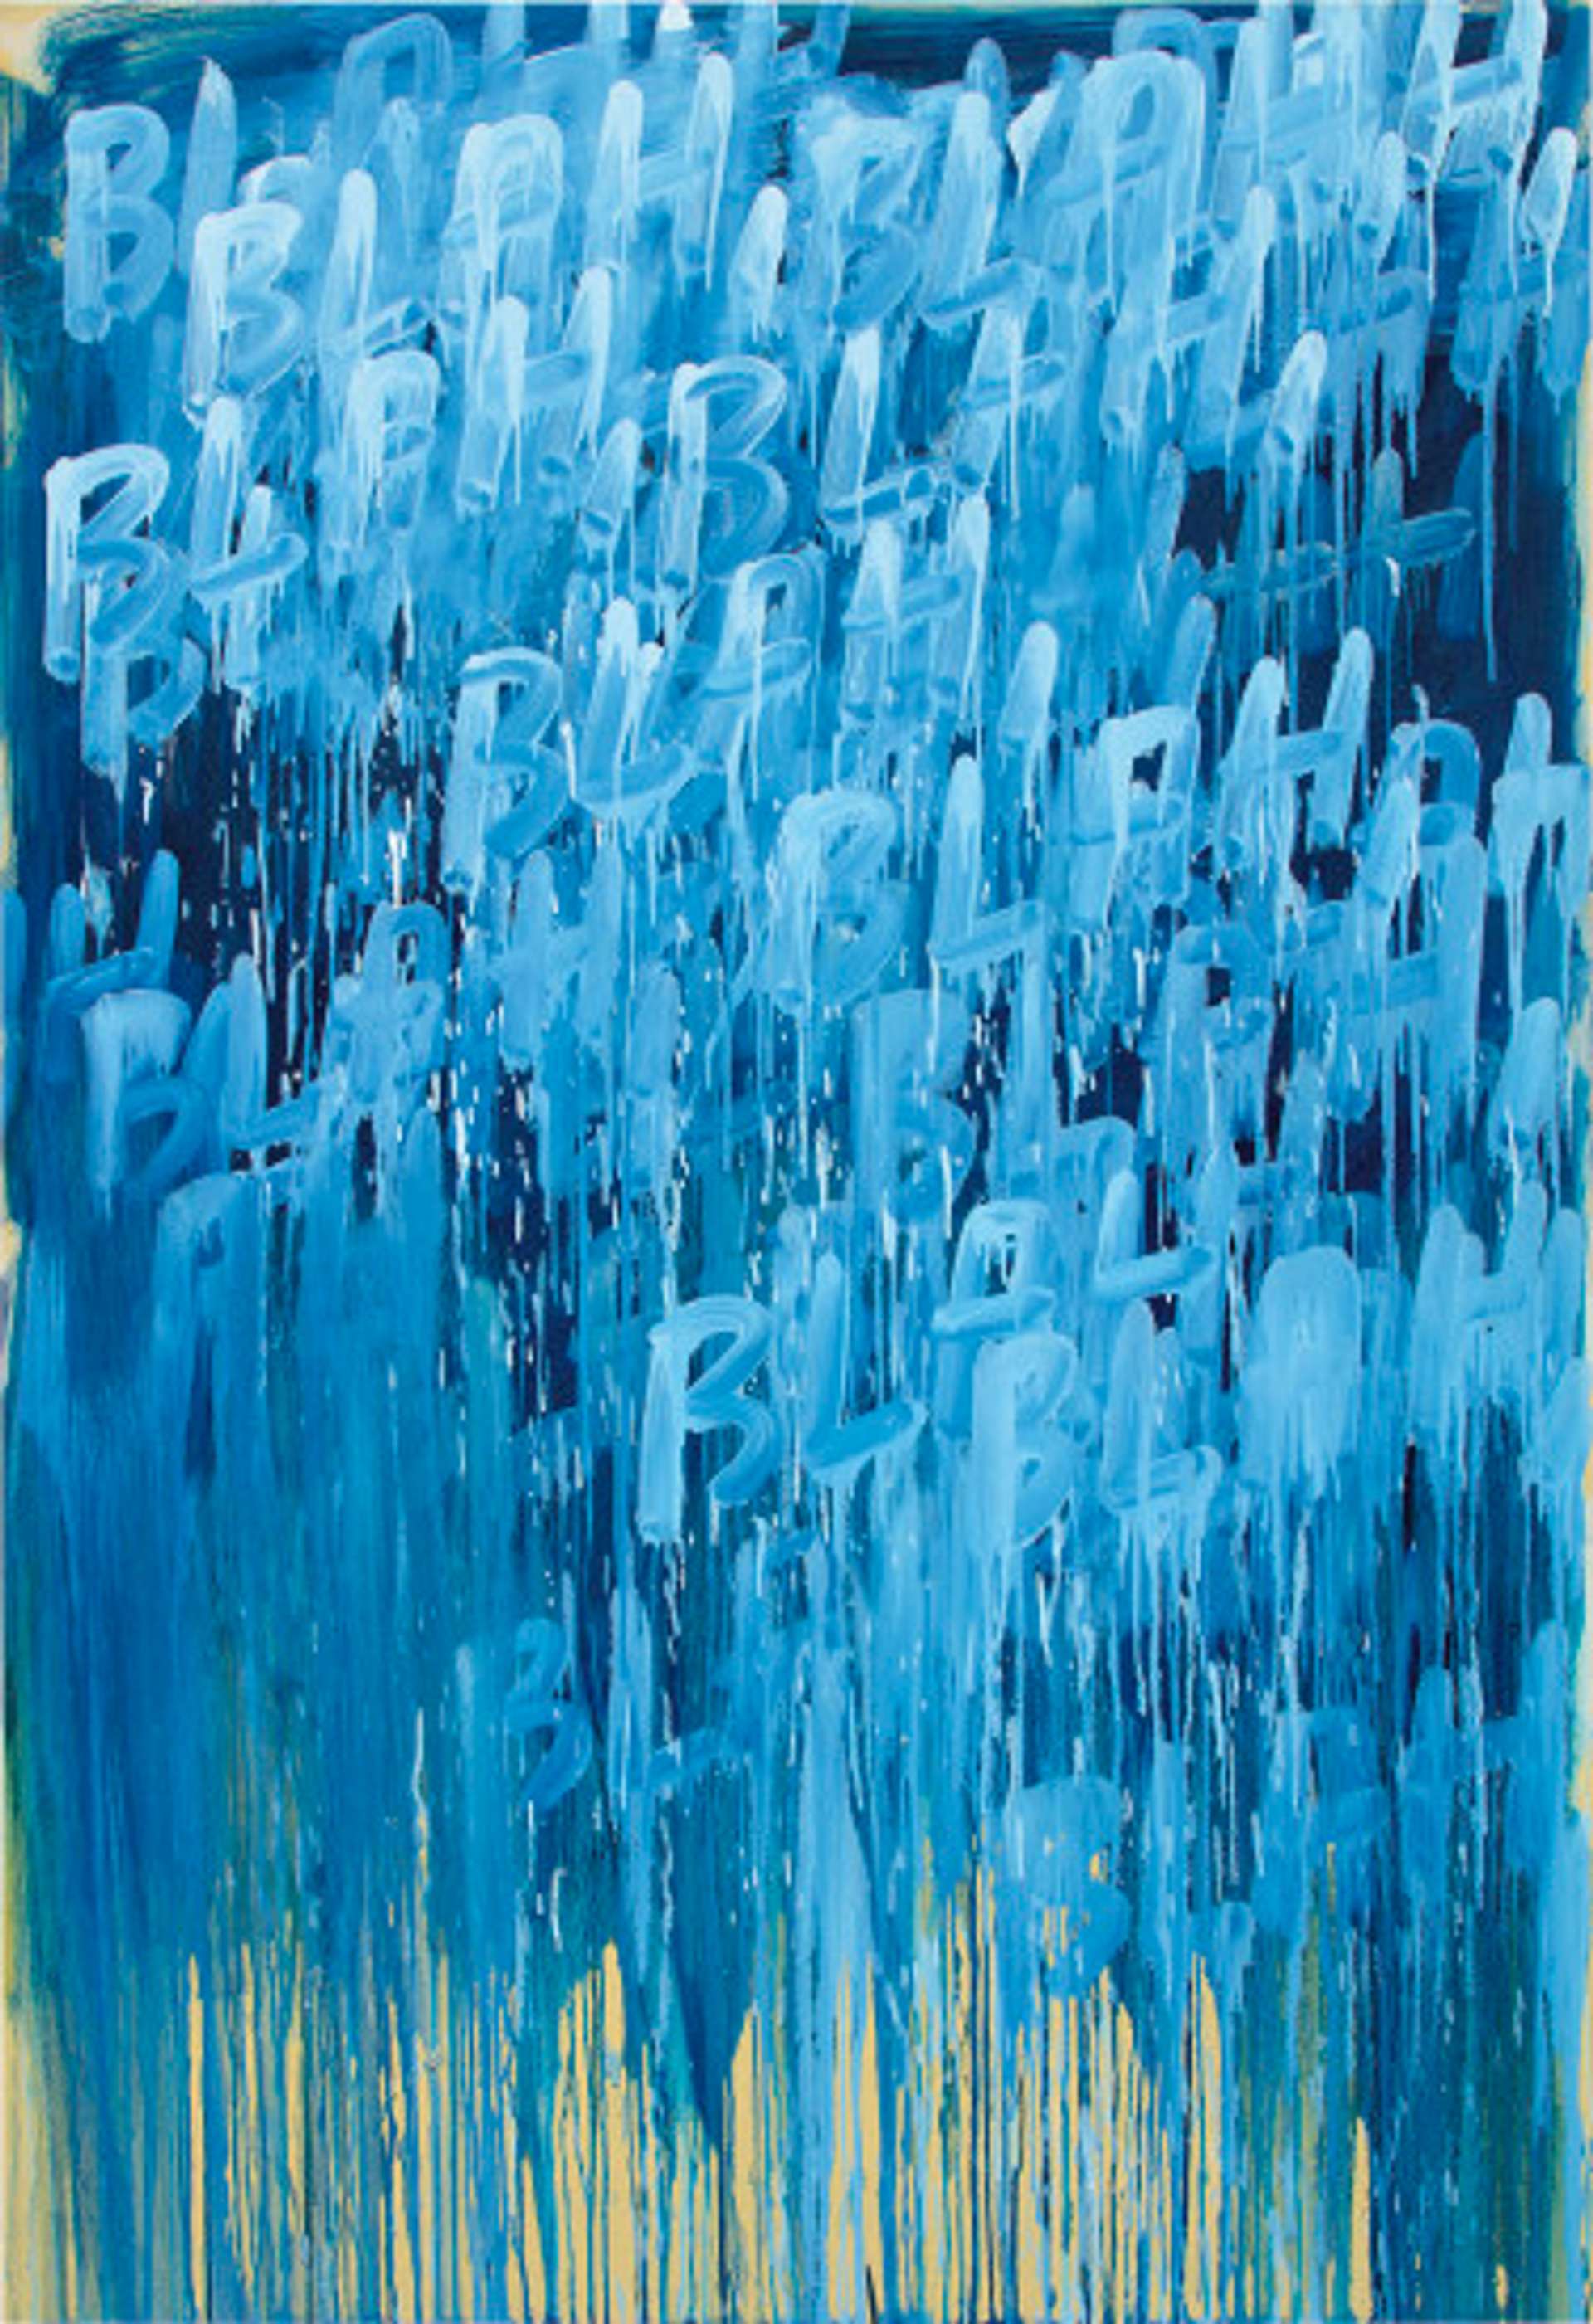 Abstract artwork with multiple shades of blue paint pouring from the top edge of the canvas and dripping downwards, forming the repeated words "Blah, Blah, Blah" within the dripped paint.